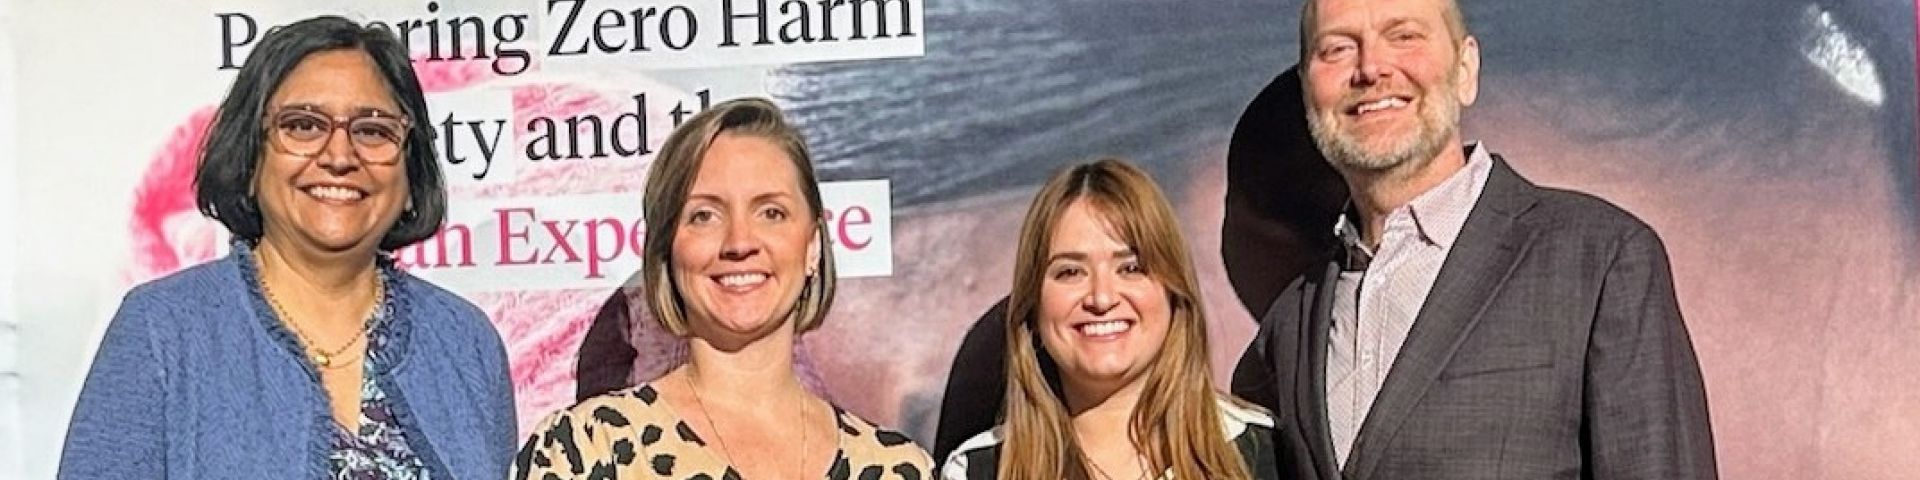 Jennifer Lovitte, second from left, patient safety coordinator for Children’s & Women’s Hospital, and Anna Blache, patient safety coordinator for University Hospital, accept the Serious Safety Event Rate Reduction Award from Press Ganey’s Tejal Gandhi, left, and Kerry Butler, right, at the HX24 Safety Summit in Orlando, Florida.